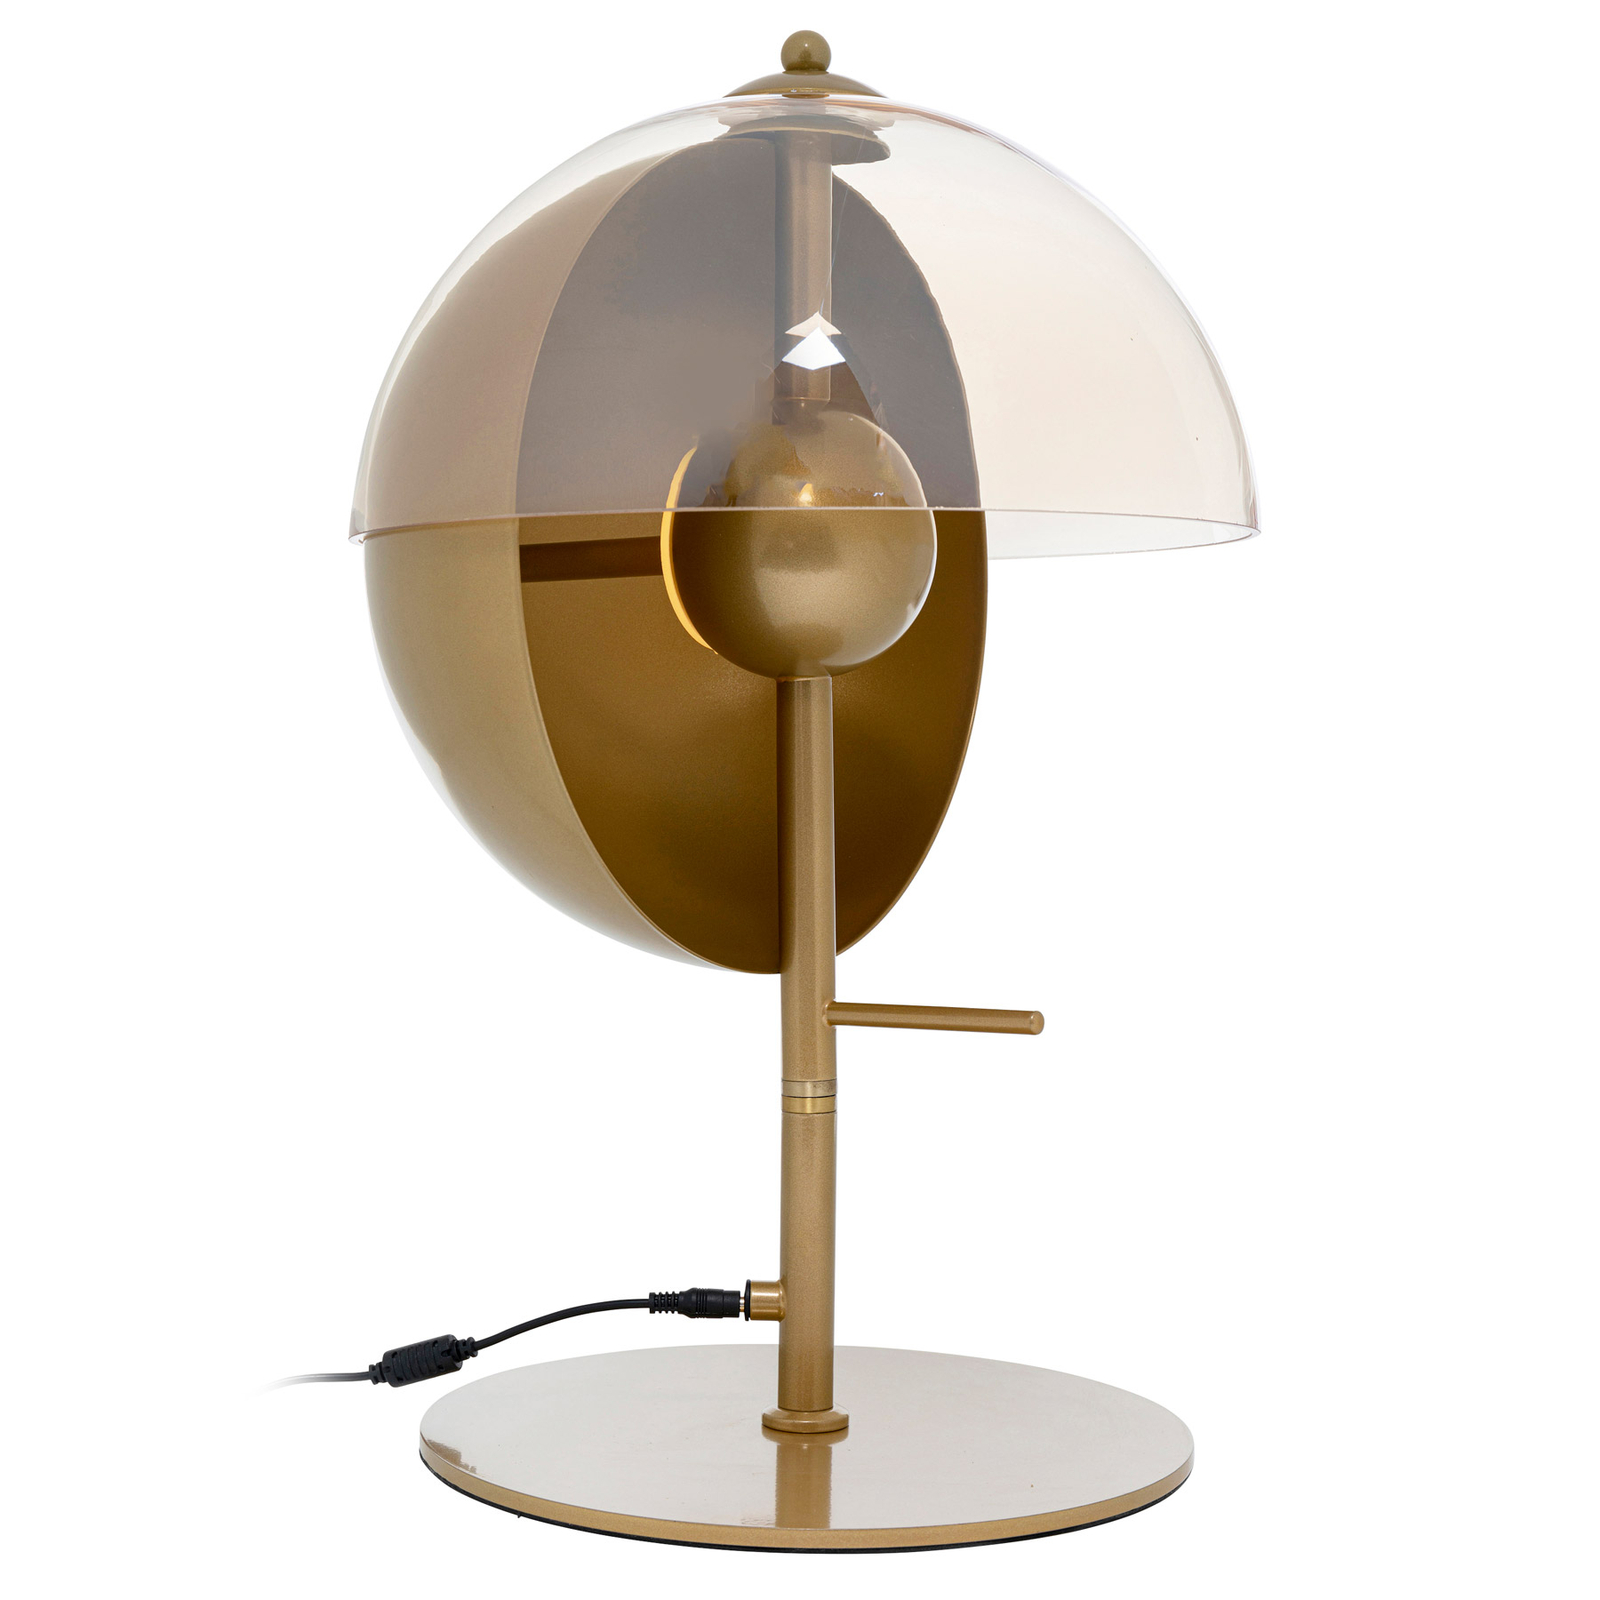 KARE Romy LED table lamp steel and glass gold